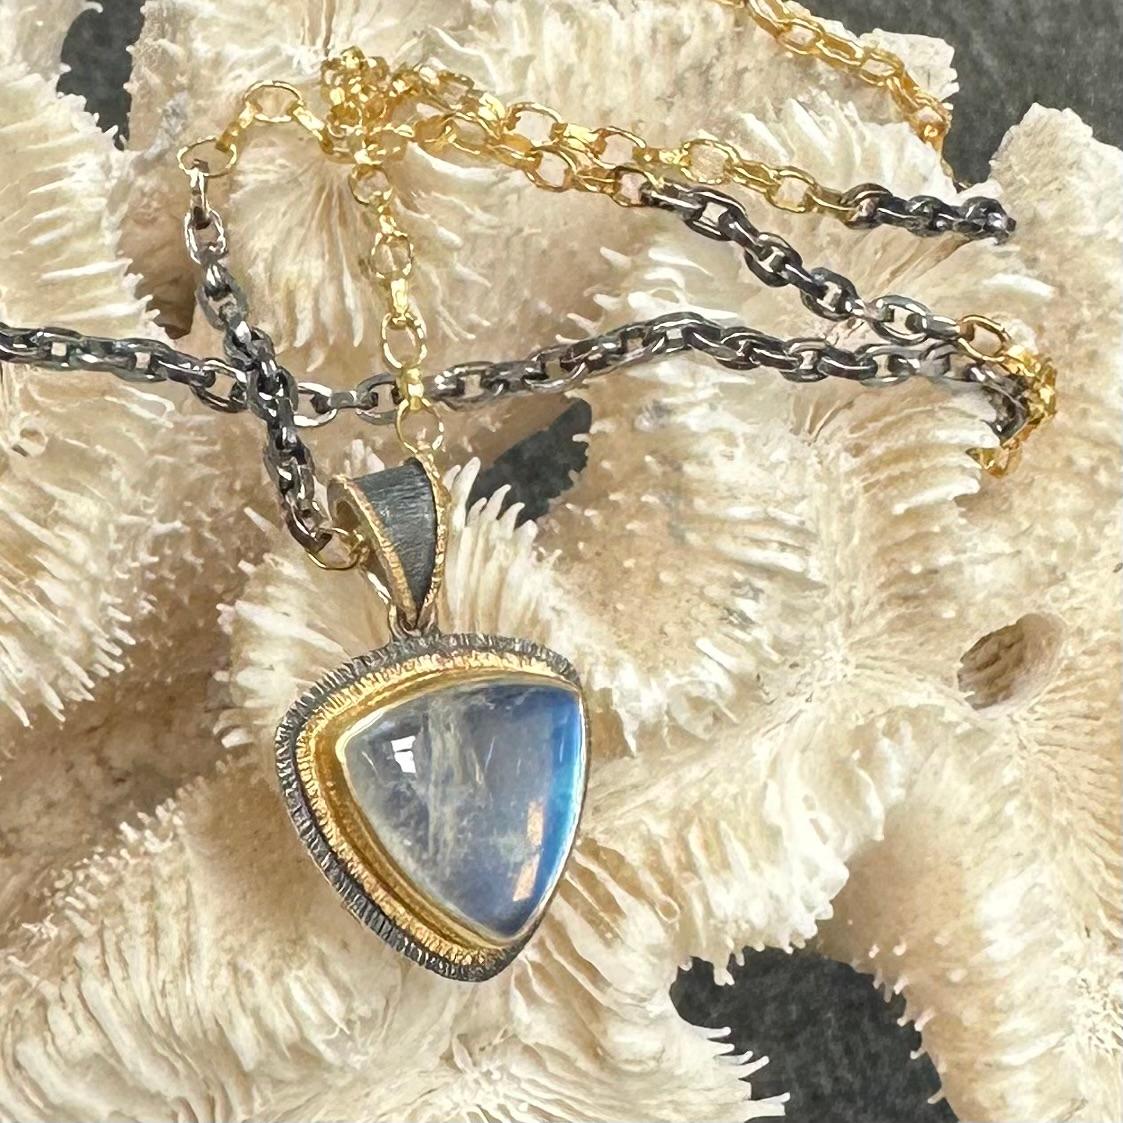 Steven Battelle 10.2 Carats Rainbow Moonstone Silver/18K Pendant With Chain For Sale 3